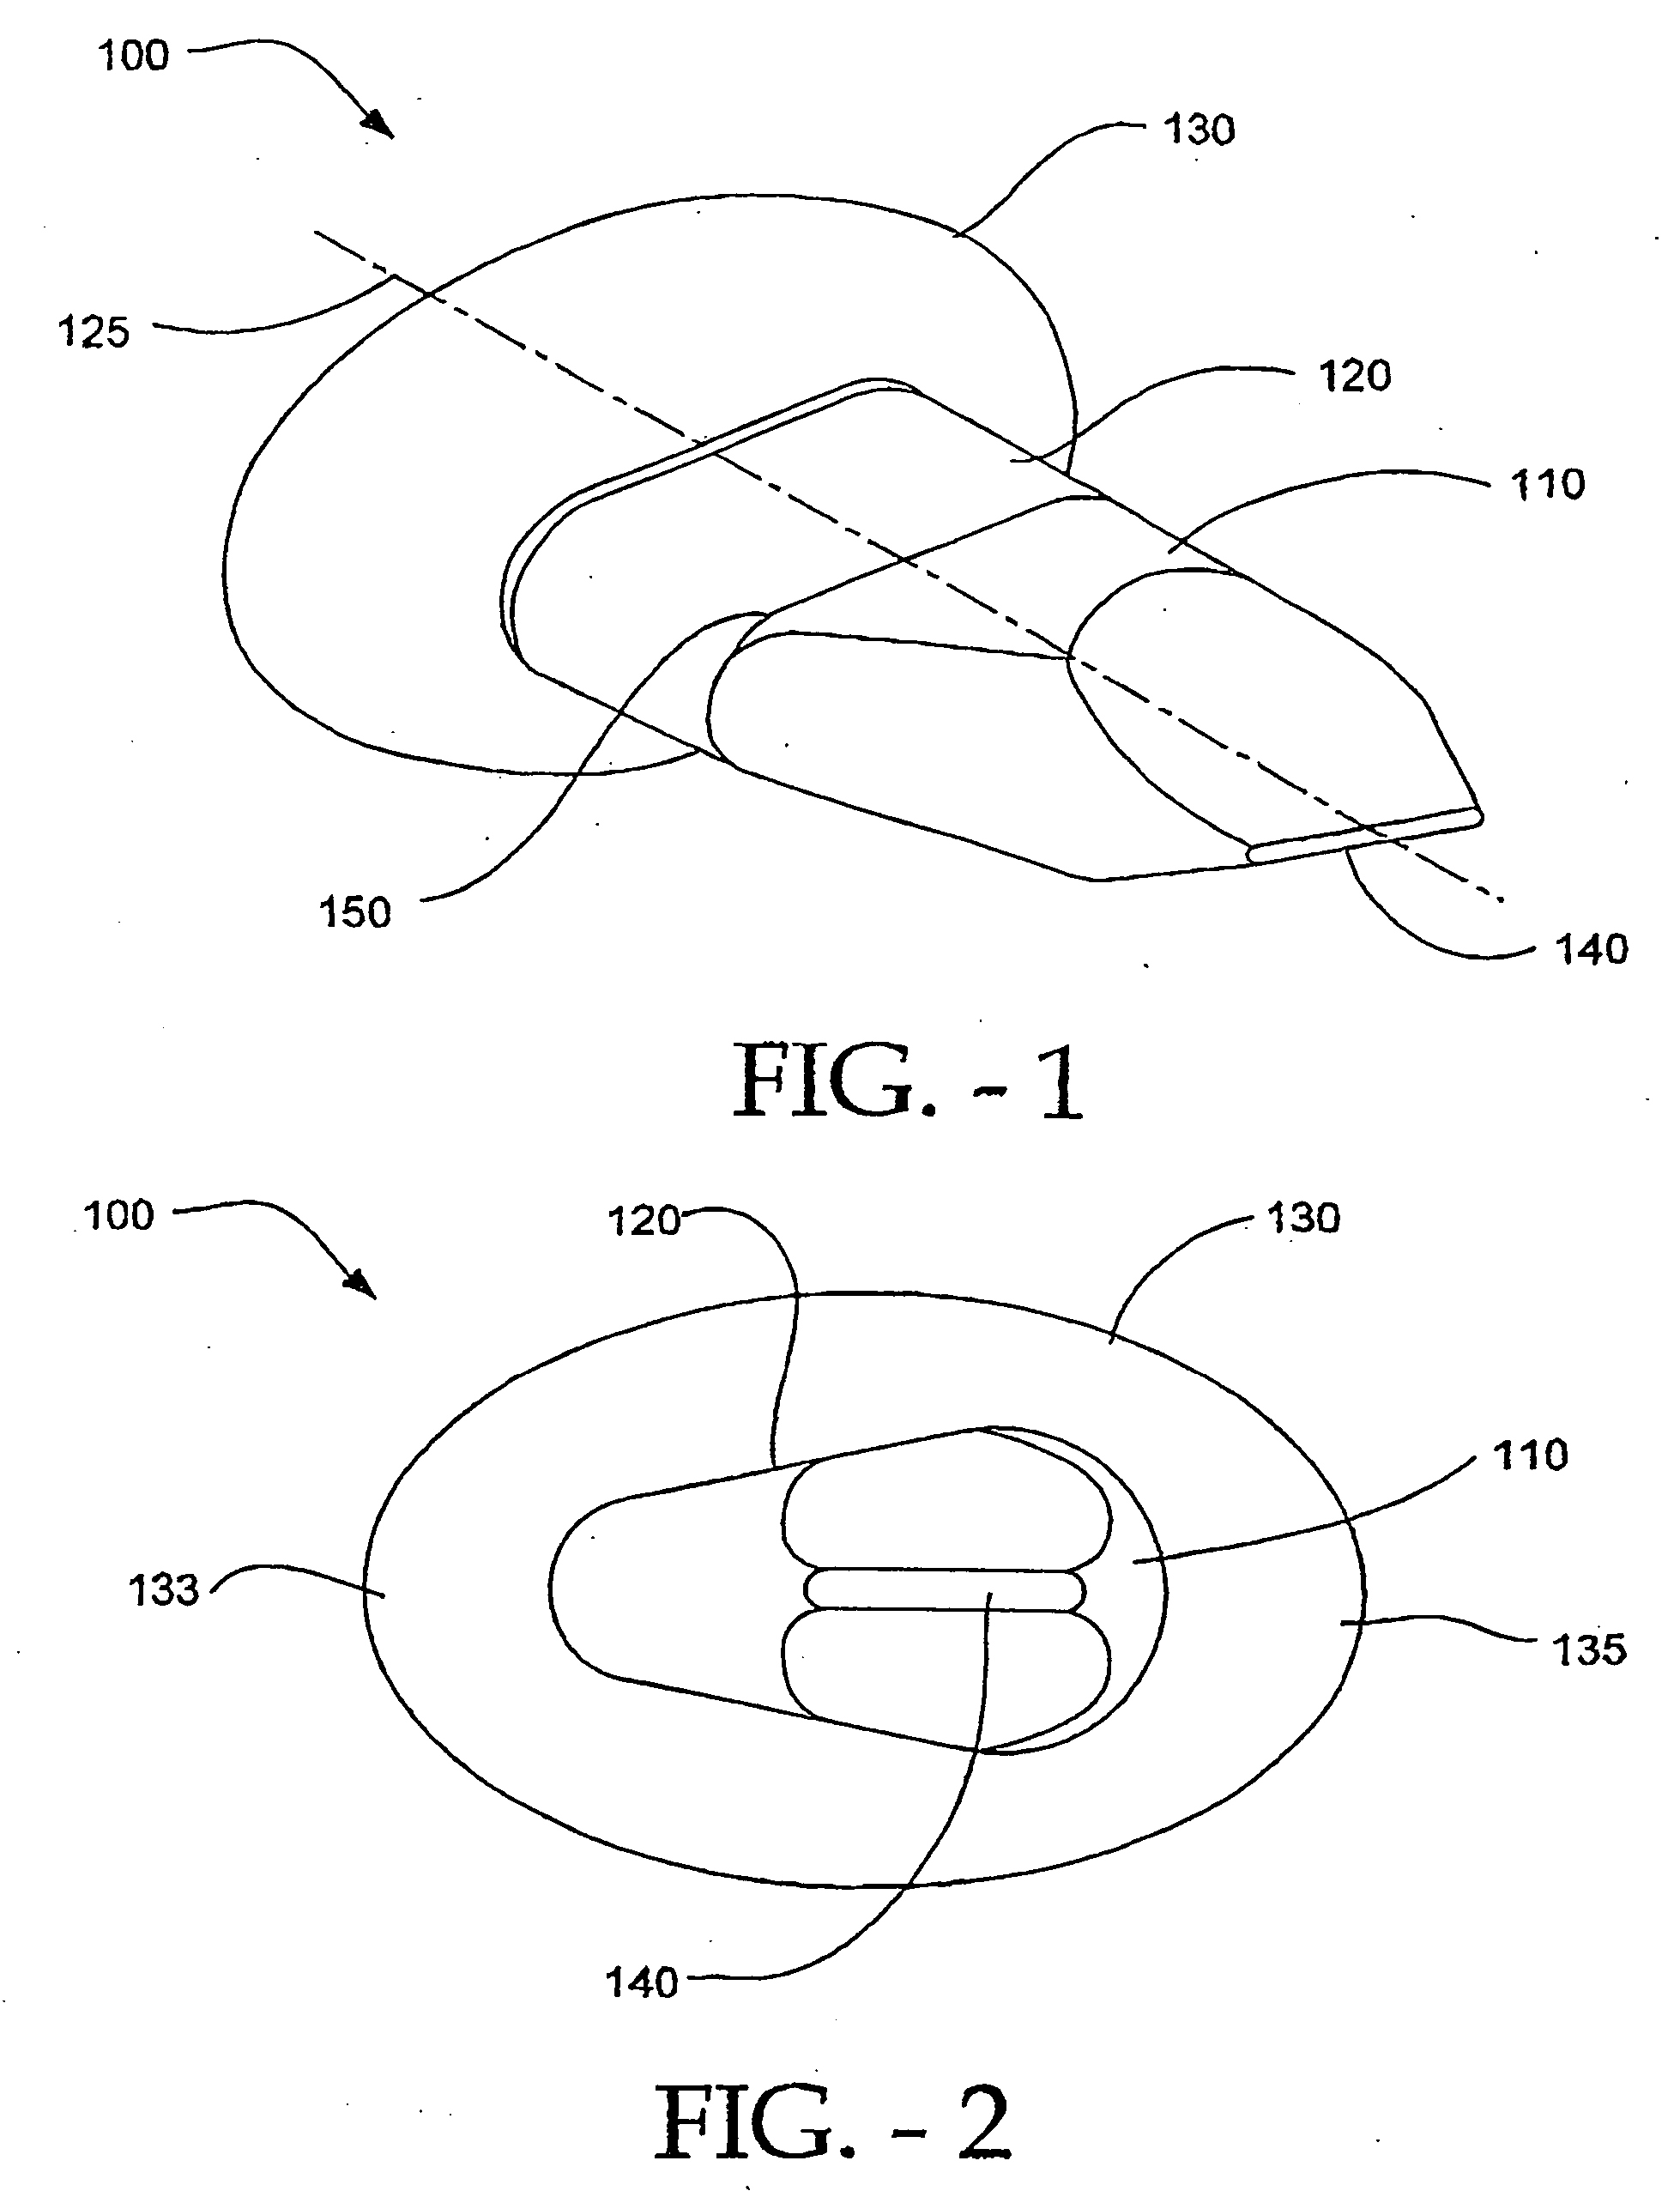 Cervical interspinous process distraction implant and method of implantation